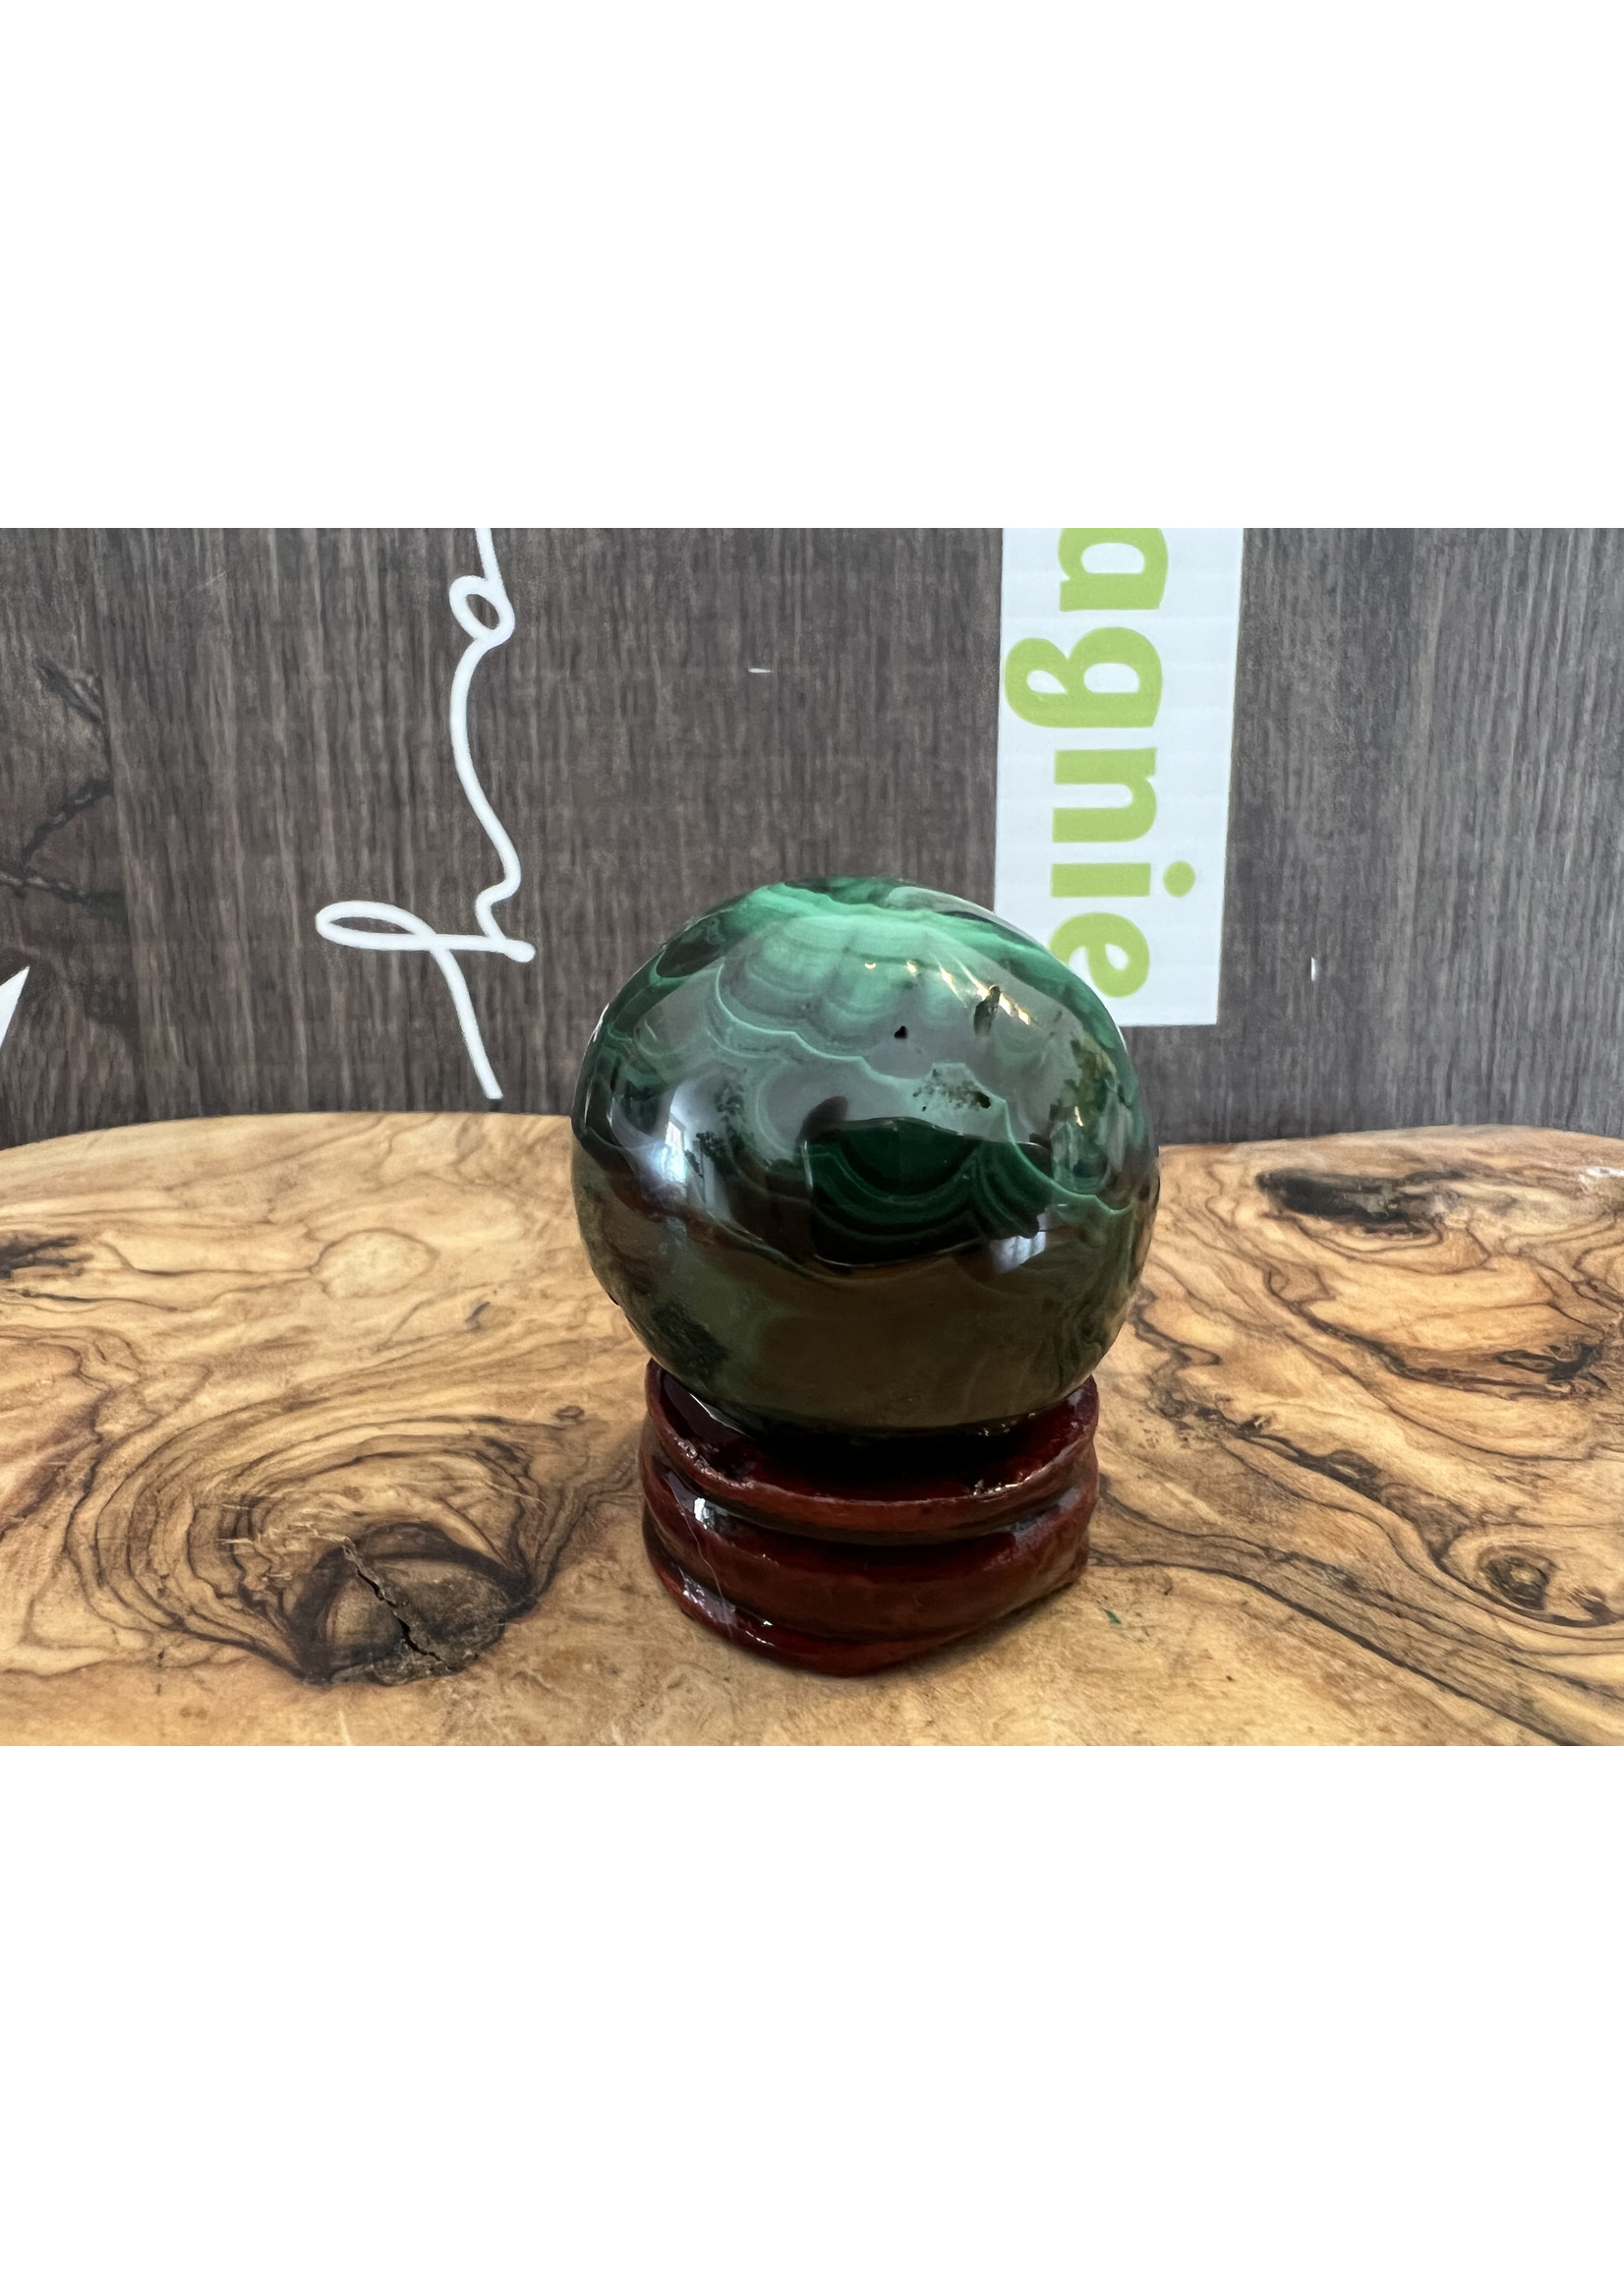 special malachite sphere, it fights against depression by radiating powerful positive waves